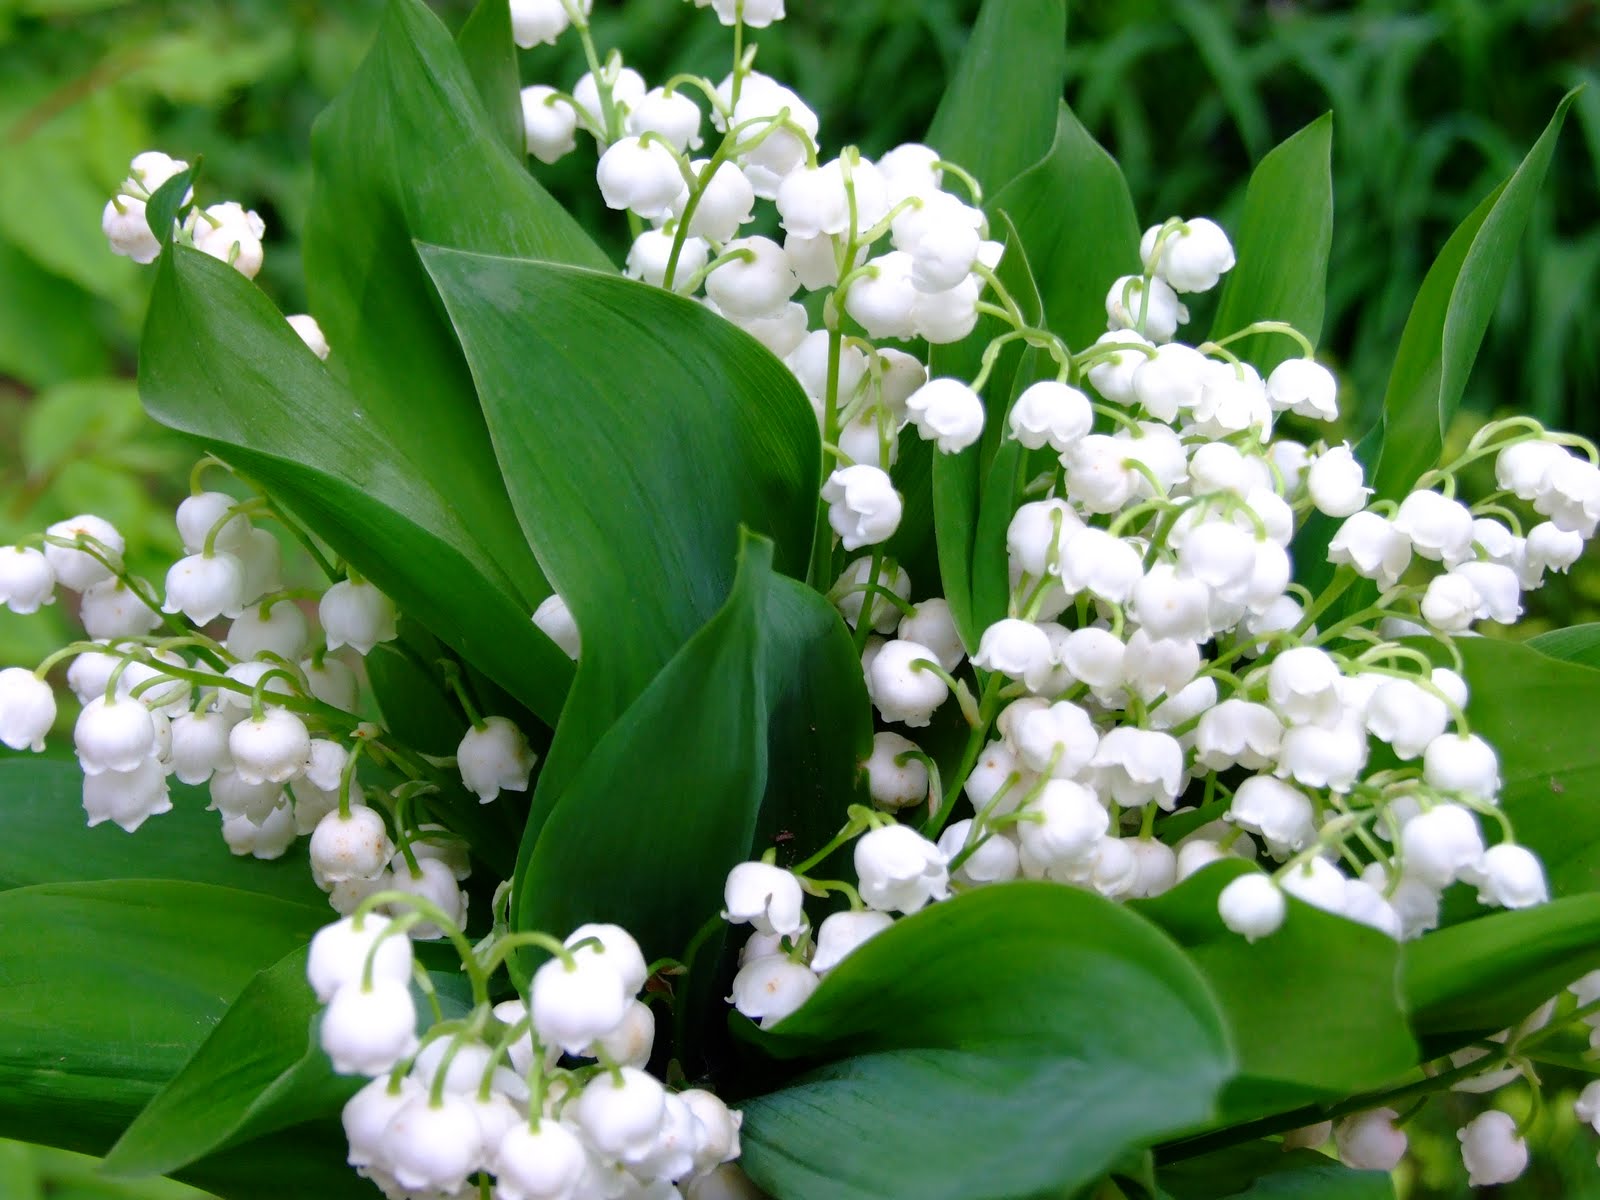 When it comes to seasonal scents, for many people “spring” can be summed up by one flower: lily of the valley. This dainty blossom has an appearance and ...